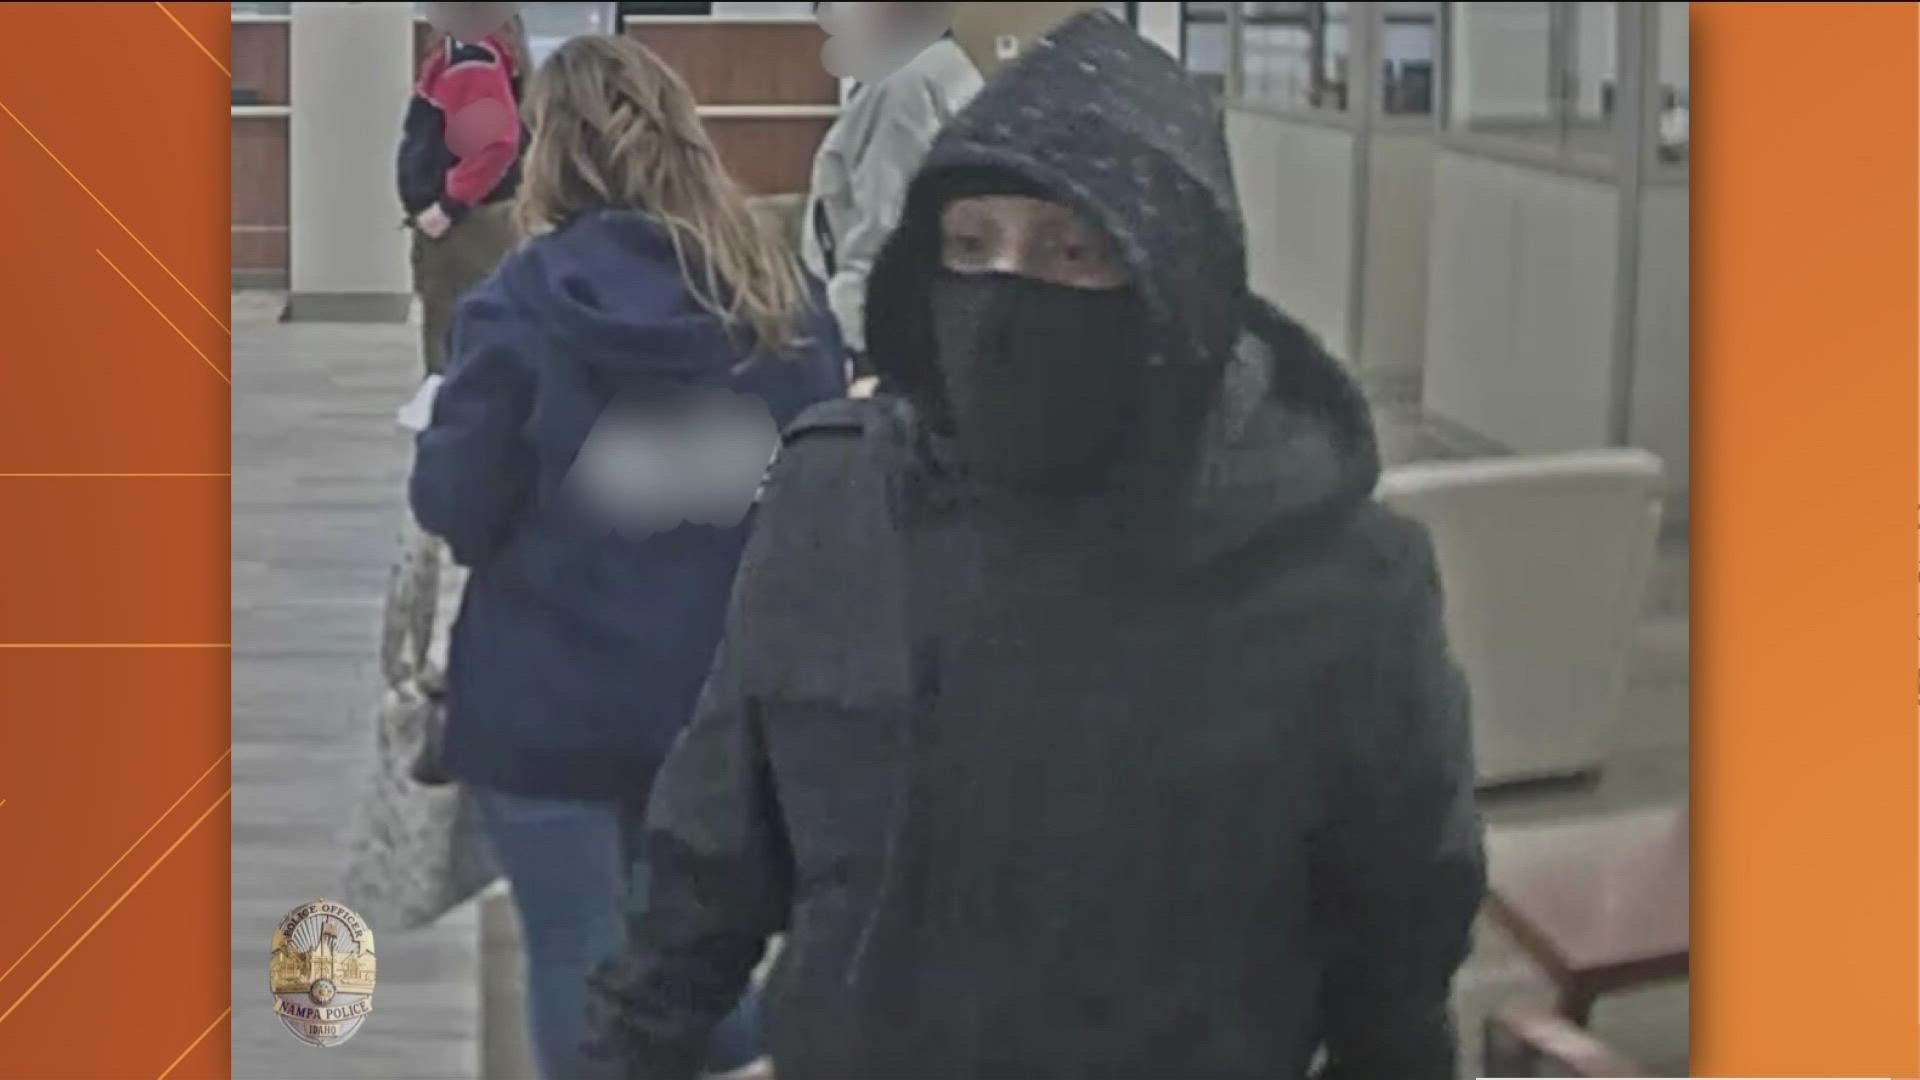 Nampa Police said the man stole a vehicle warming outside of a residence Tuesday morning and took a deposit bag with cash from a person in a credit union nearby.